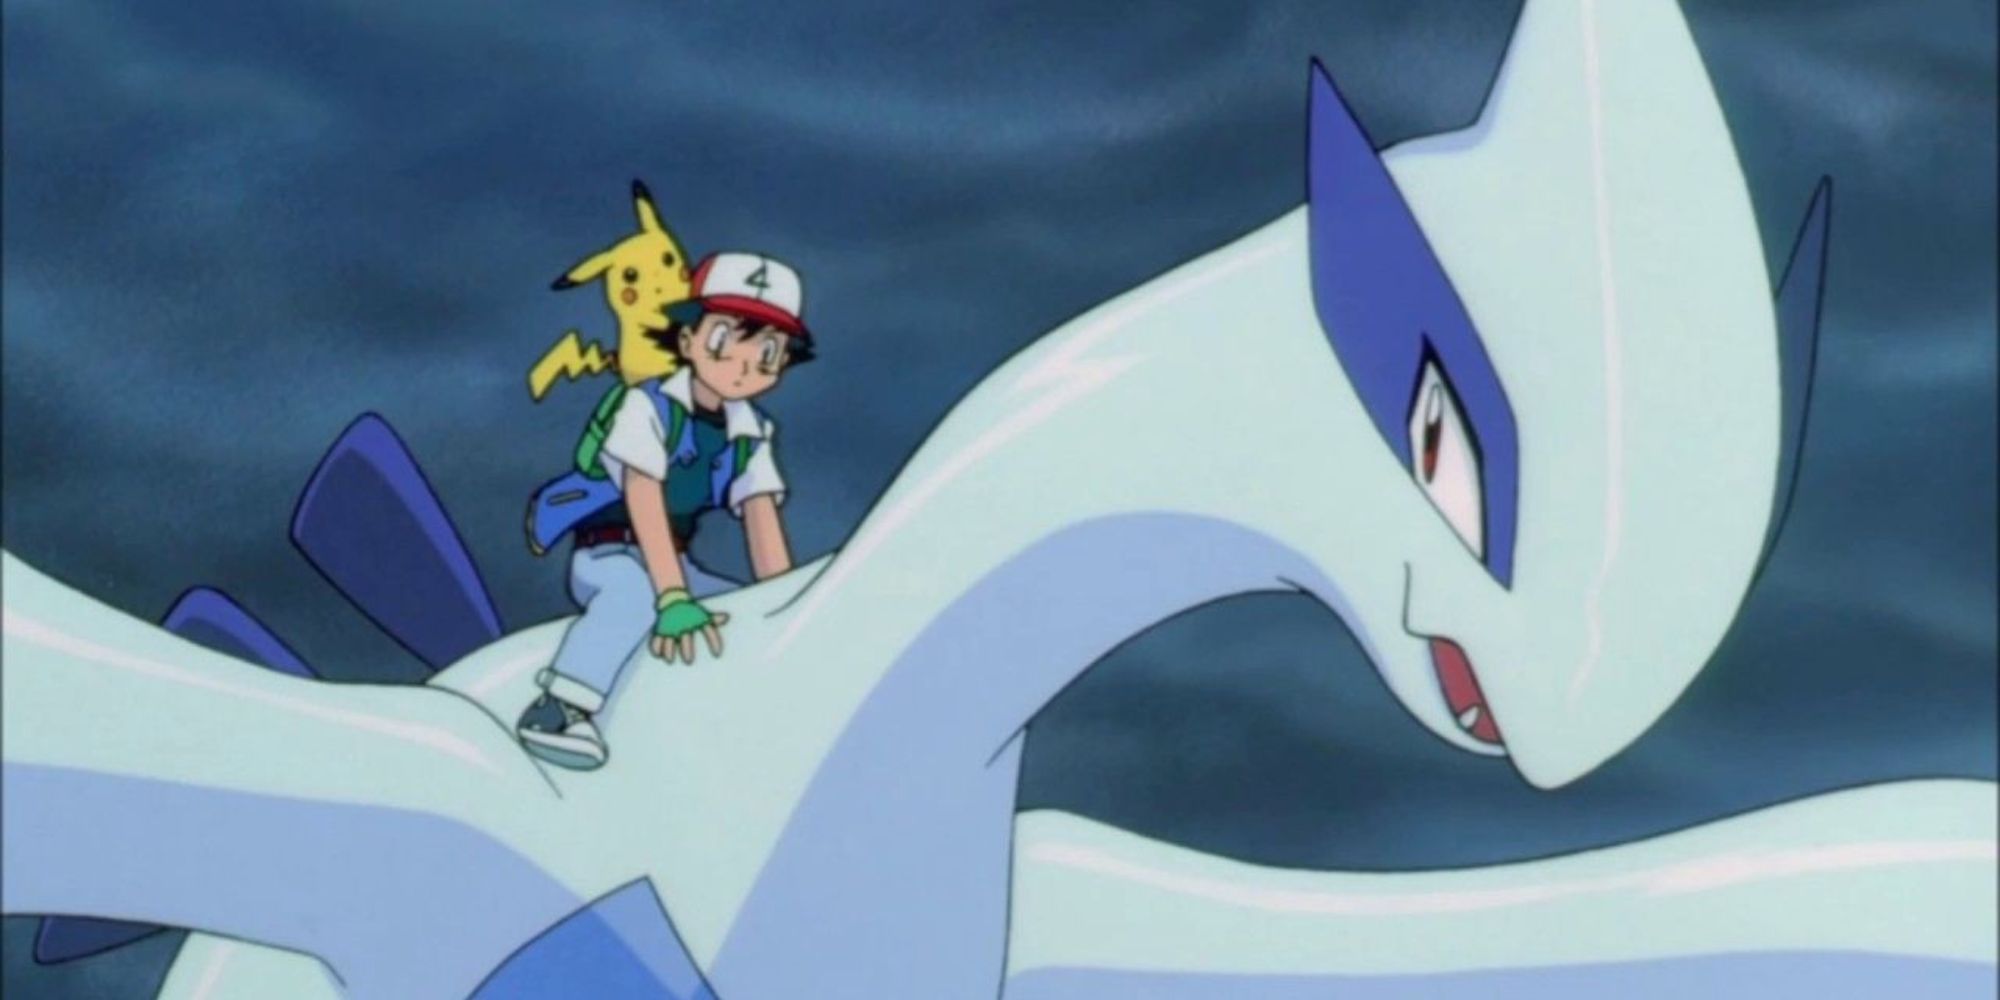 Ash and Pikachu ride on Lugia's back during a dark night